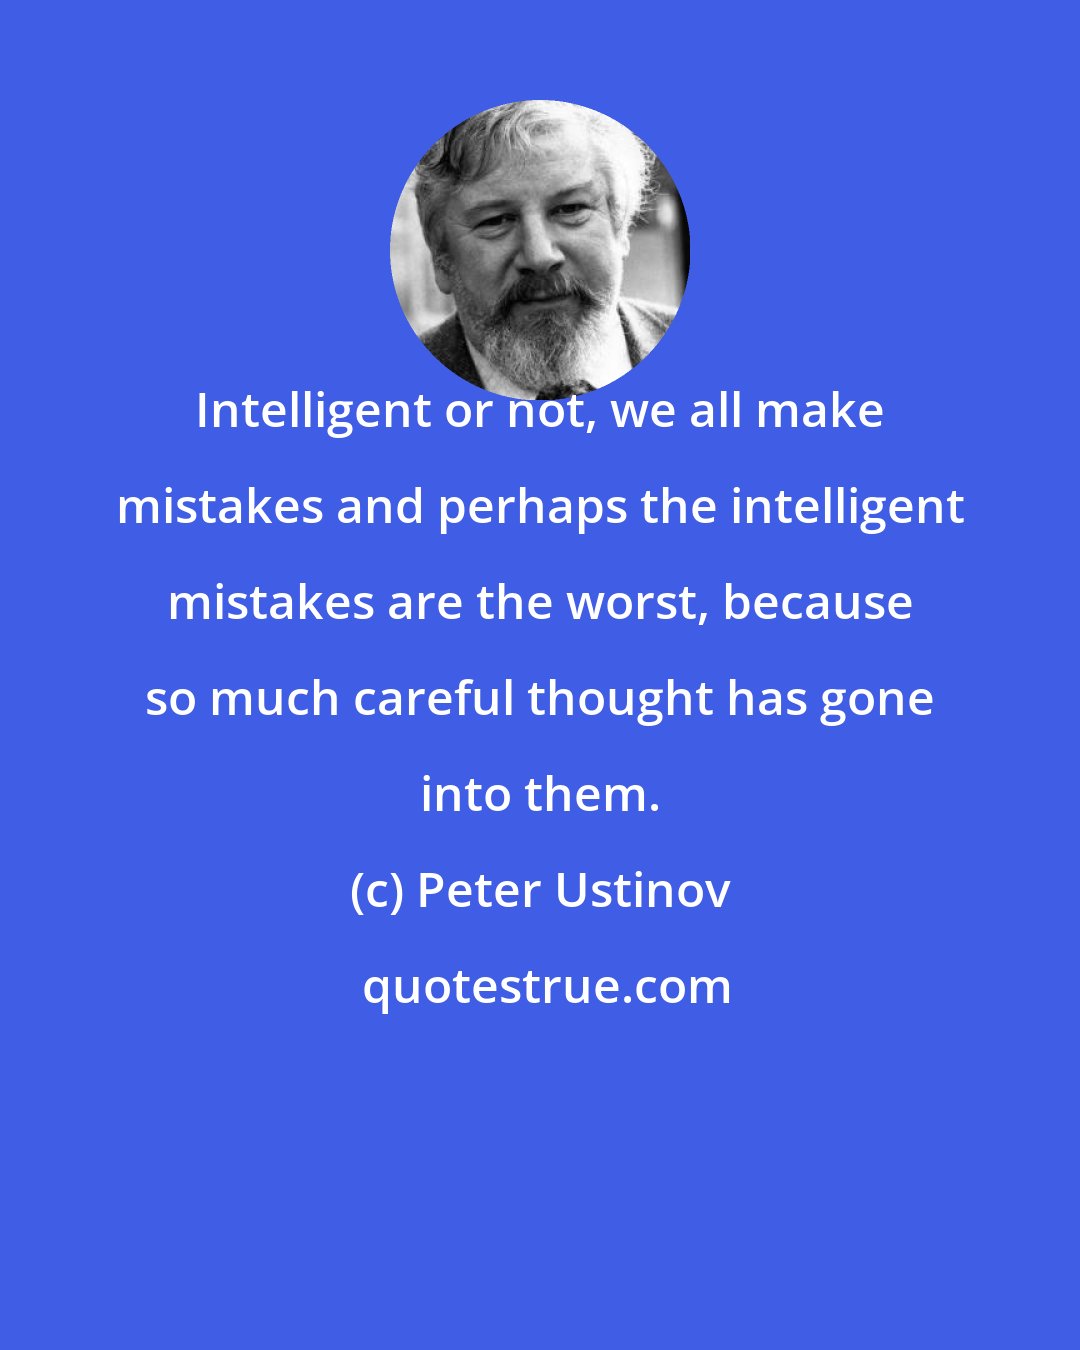 Peter Ustinov: Intelligent or not, we all make mistakes and perhaps the intelligent mistakes are the worst, because so much careful thought has gone into them.